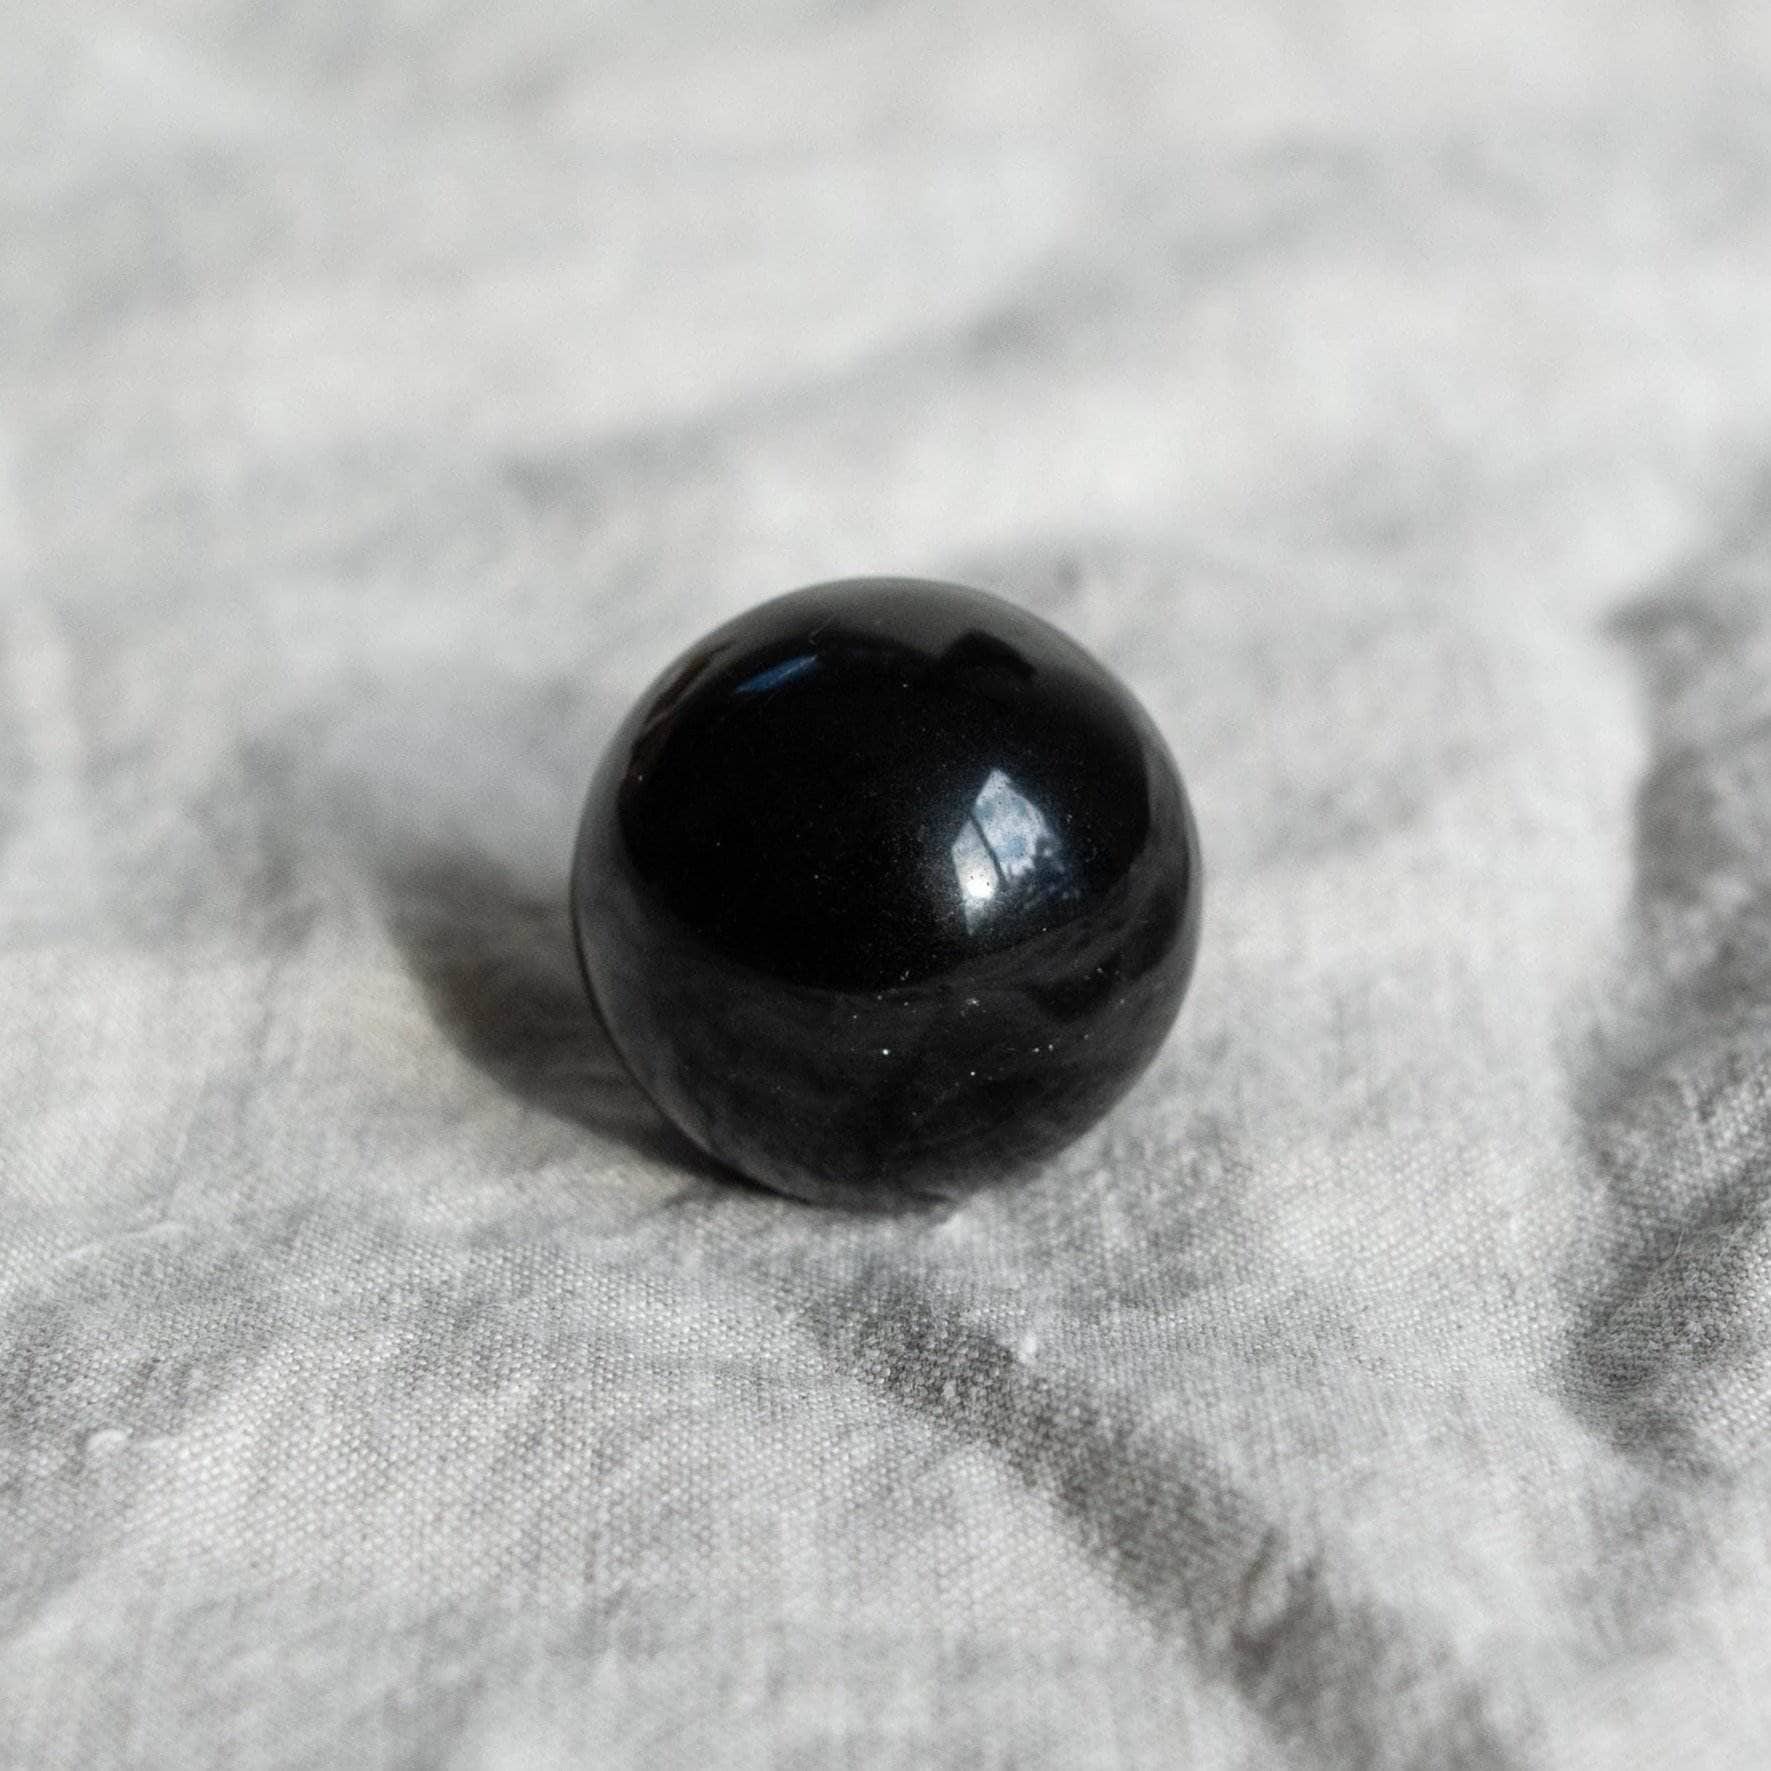  Black Obsidian Sphere by Tiny Rituals Tiny Rituals Perfumarie